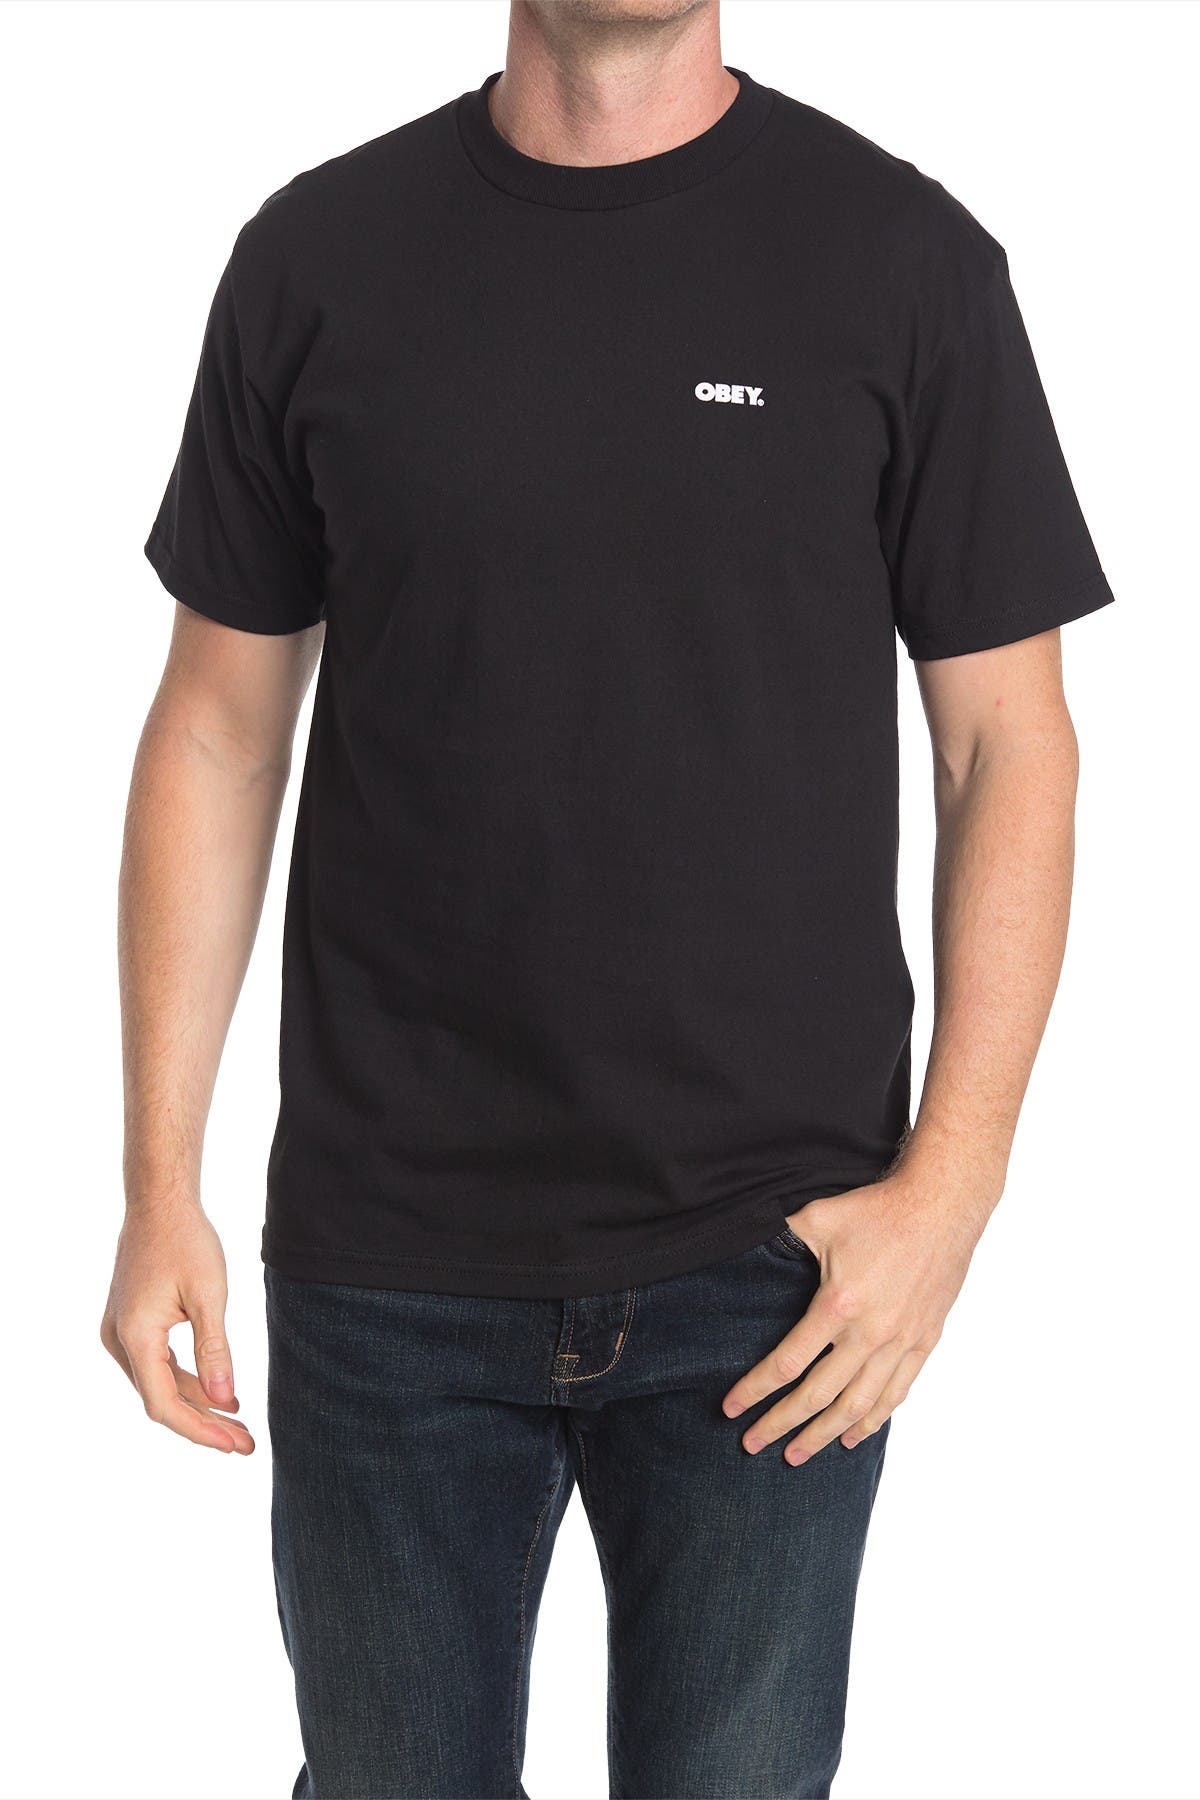 Obey | Peace T-Shirt | Nordstrom Rack